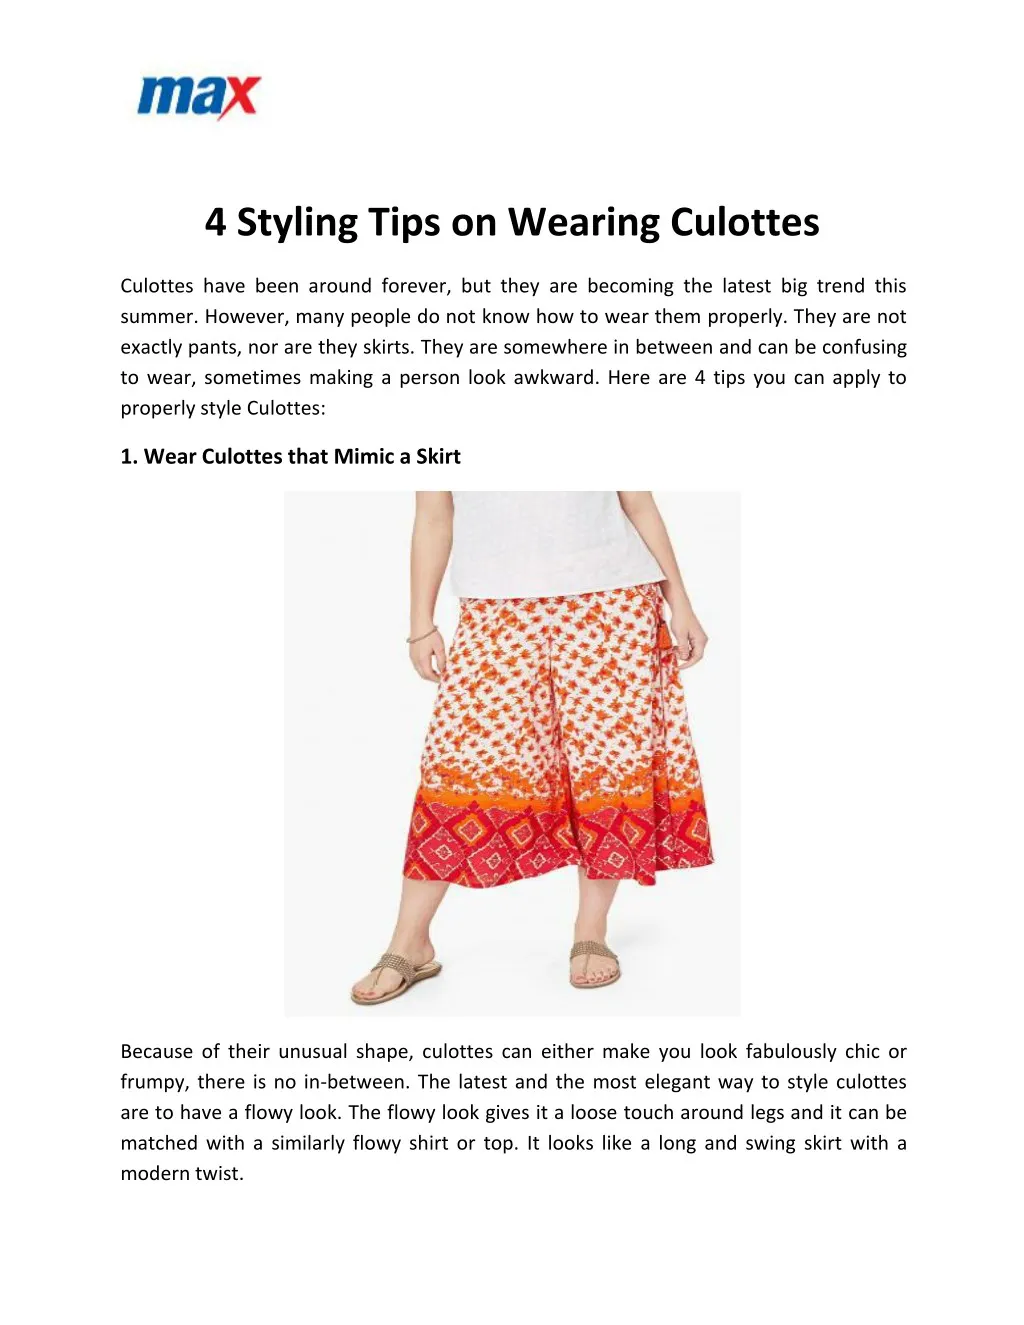 4 styling tips on wearing culottes